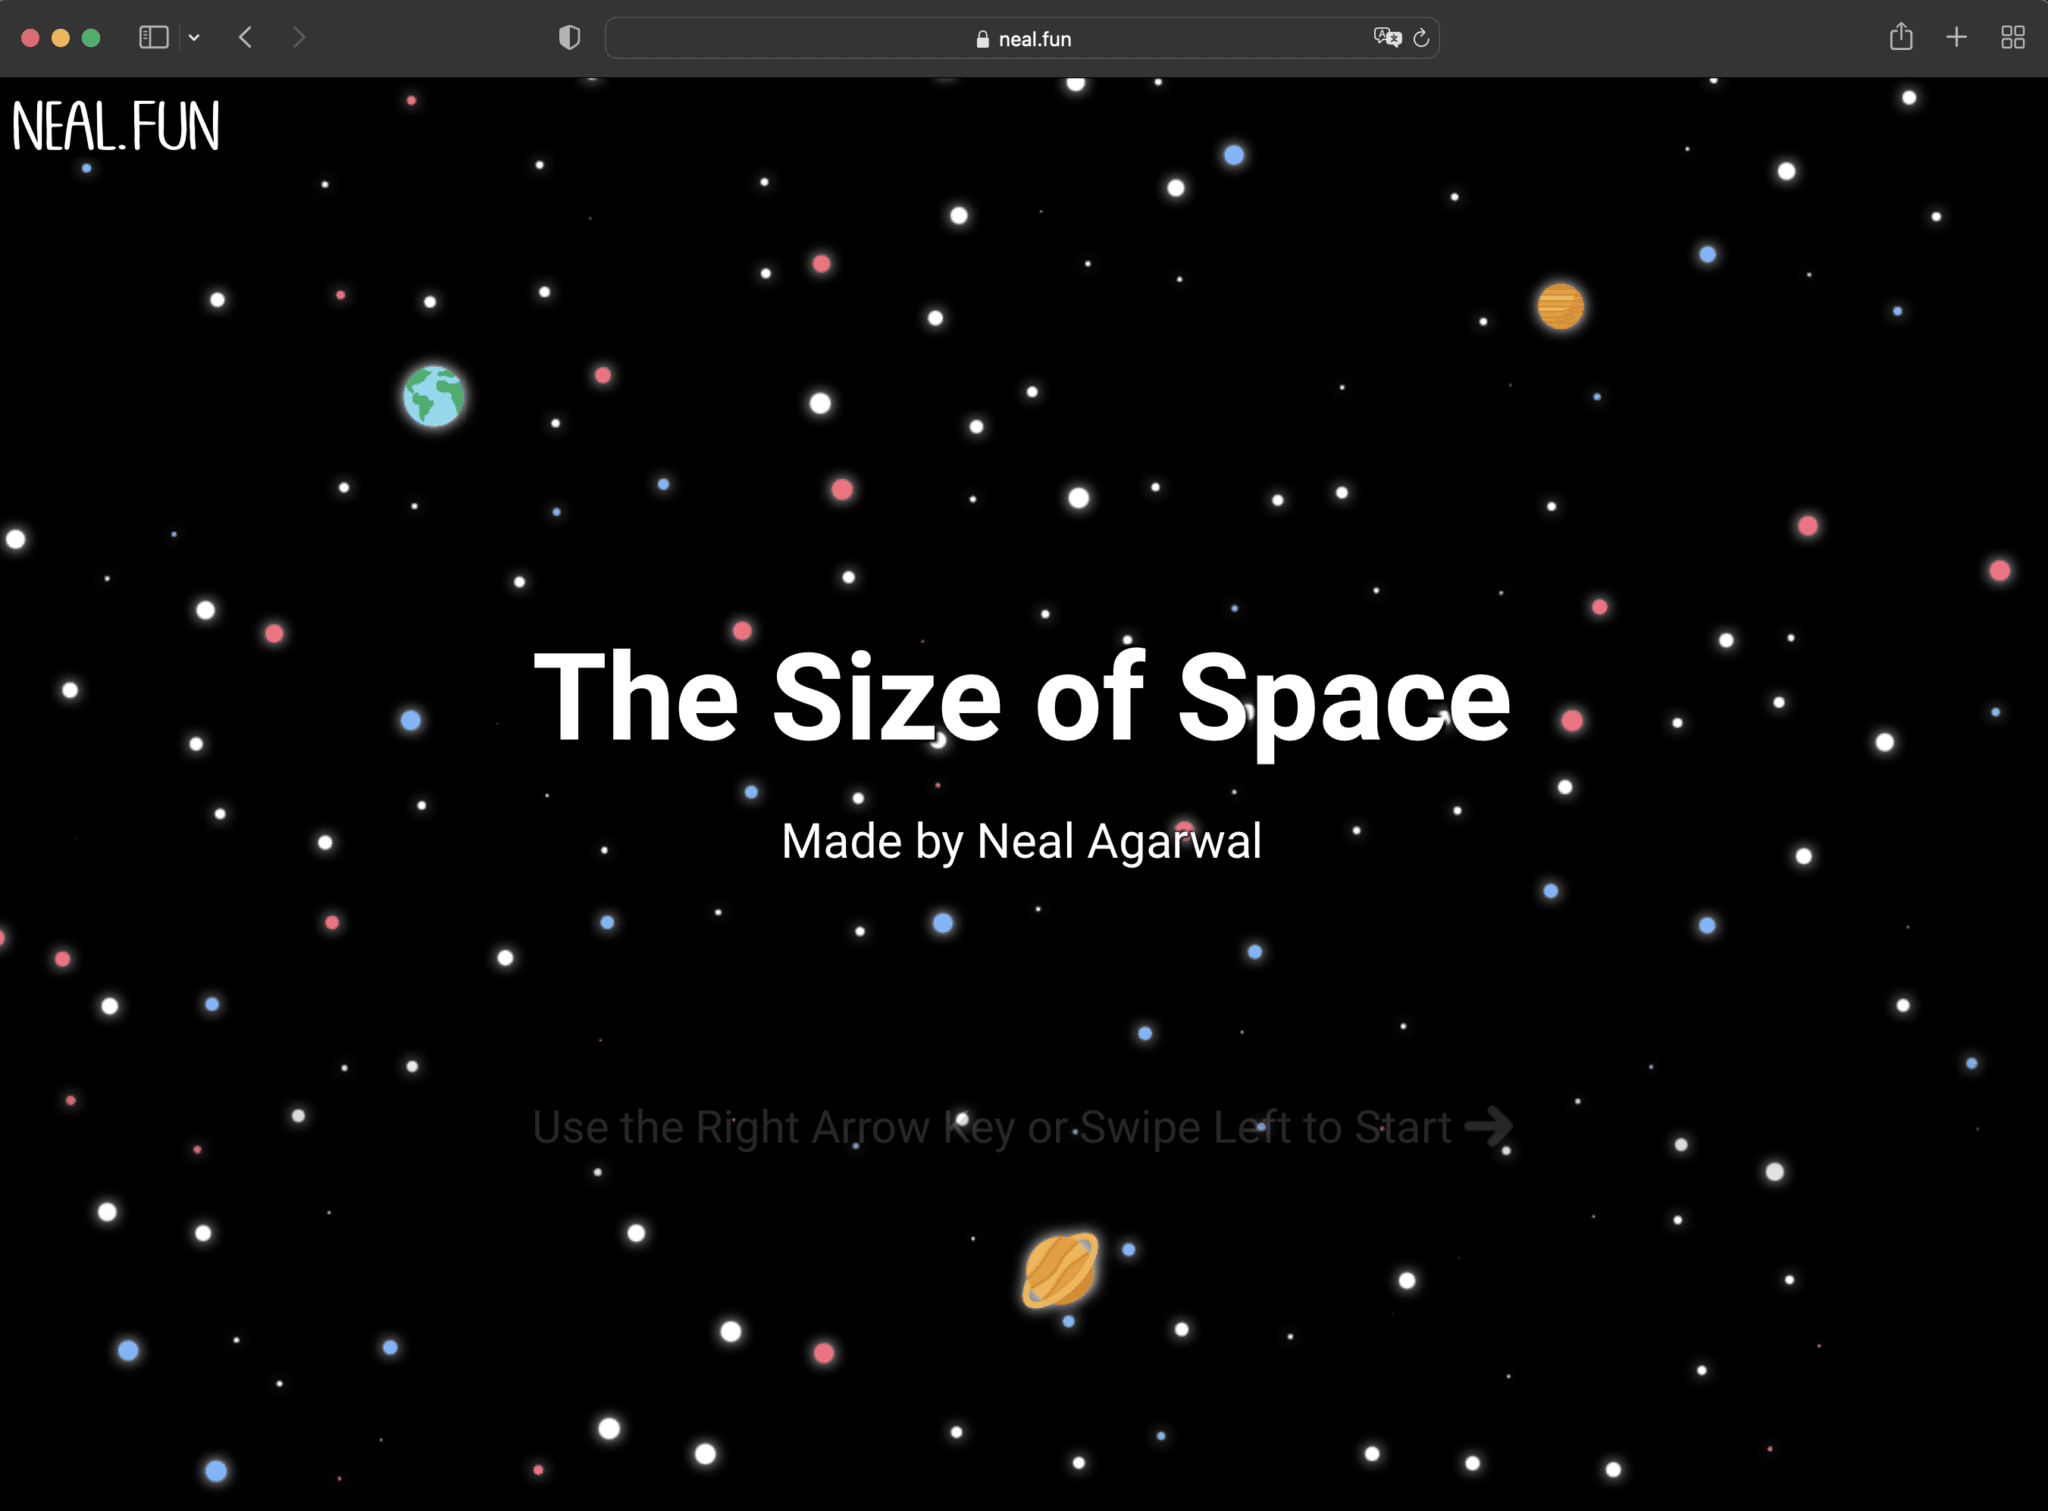 The Size of Space | Neal.Fun | Abakcus